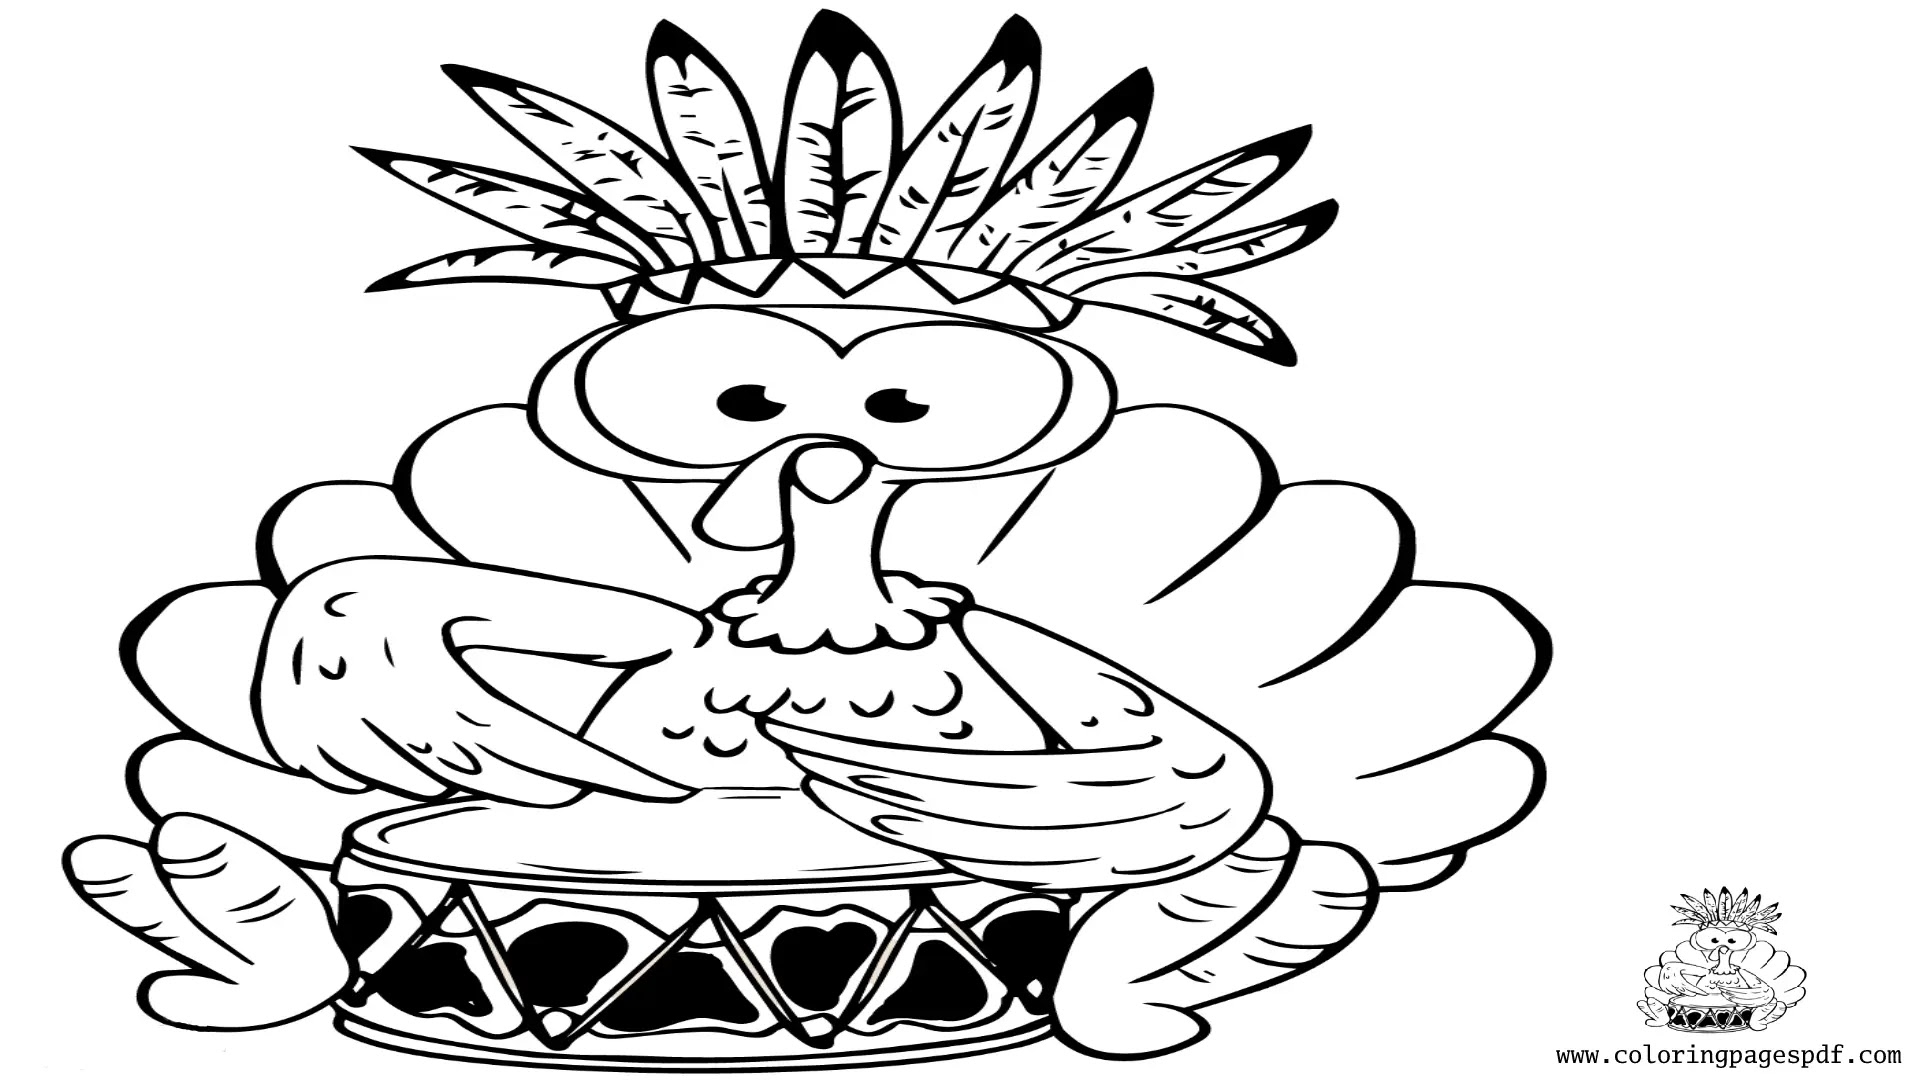 Coloring Page Of A Turkey Playing With A Drum